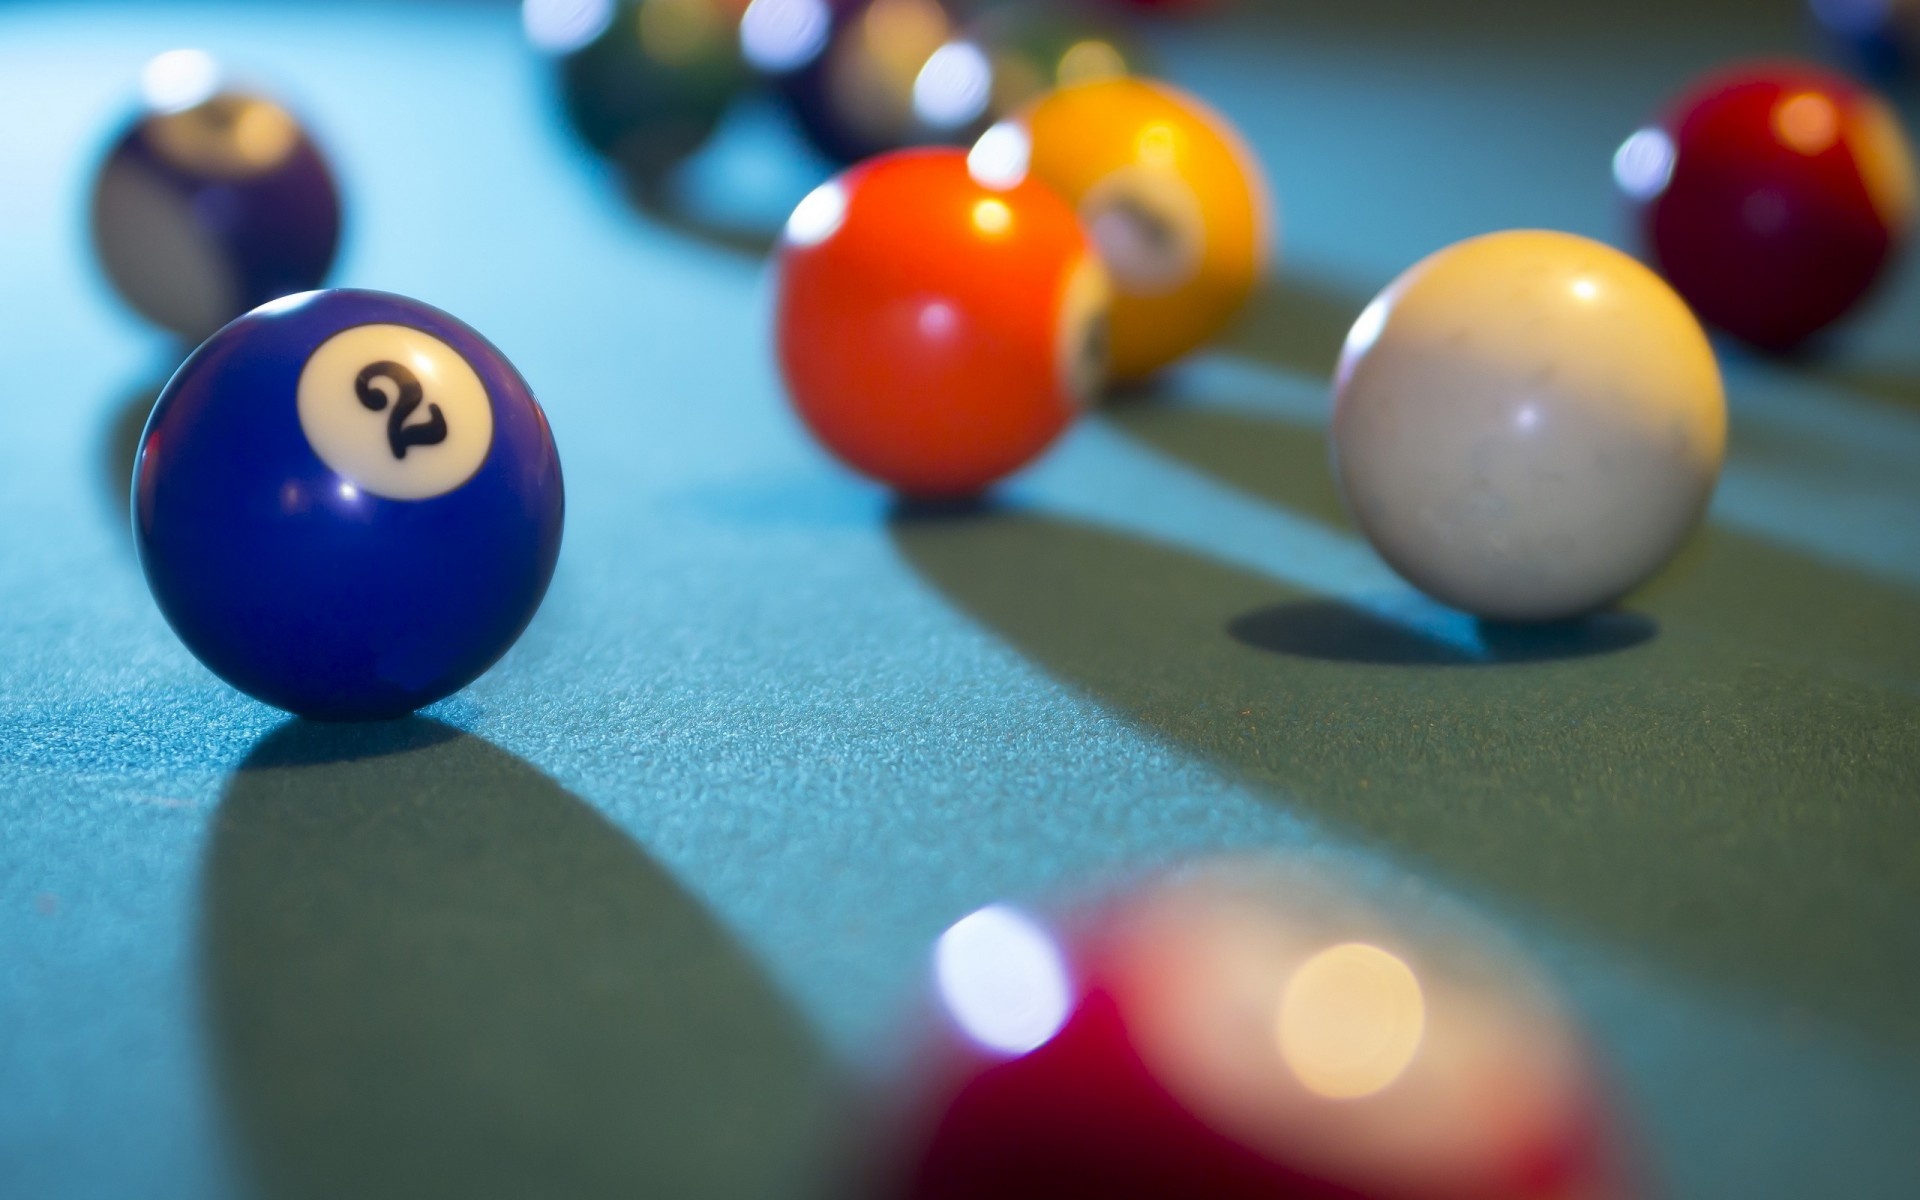 Billiards: Object balls, Small but hard and numbered balls used in carom, pool, and snooker styles of cue sports. 1920x1200 HD Background.